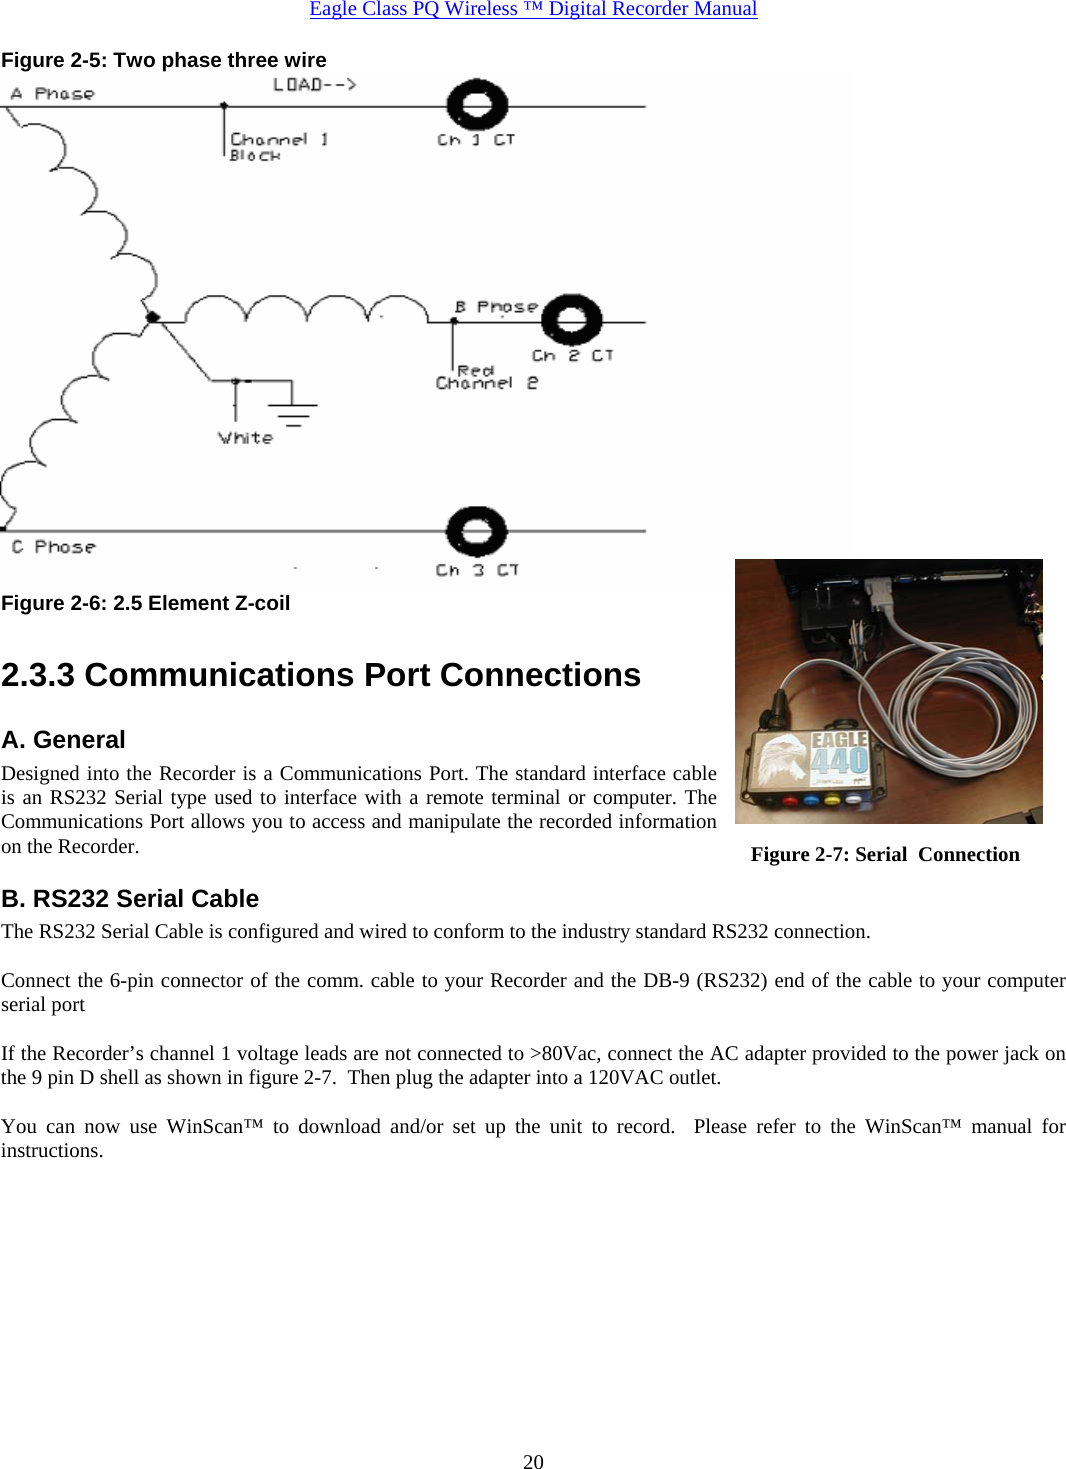  Eagle Class PQ Wireless ™ Digital Recorder Manual   20Figure 2-5: Two phase three wire  Figure 2-6: 2.5 Element Z-coil    2.3.3 Communications Port Connections A. General Designed into the Recorder is a Communications Port. The standard interface cable is an RS232 Serial type used to interface with a remote terminal or computer. The Communications Port allows you to access and manipulate the recorded information on the Recorder. B. RS232 Serial Cable The RS232 Serial Cable is configured and wired to conform to the industry standard RS232 connection.  Connect the 6-pin connector of the comm. cable to your Recorder and the DB-9 (RS232) end of the cable to your computer serial port  If the Recorder’s channel 1 voltage leads are not connected to &gt;80Vac, connect the AC adapter provided to the power jack on the 9 pin D shell as shown in figure 2-7.  Then plug the adapter into a 120VAC outlet.  You can now use WinScan™ to download and/or set up the unit to record.  Please refer to the WinScan™ manual for instructions.        Figure 2-7: Serial  Connection 